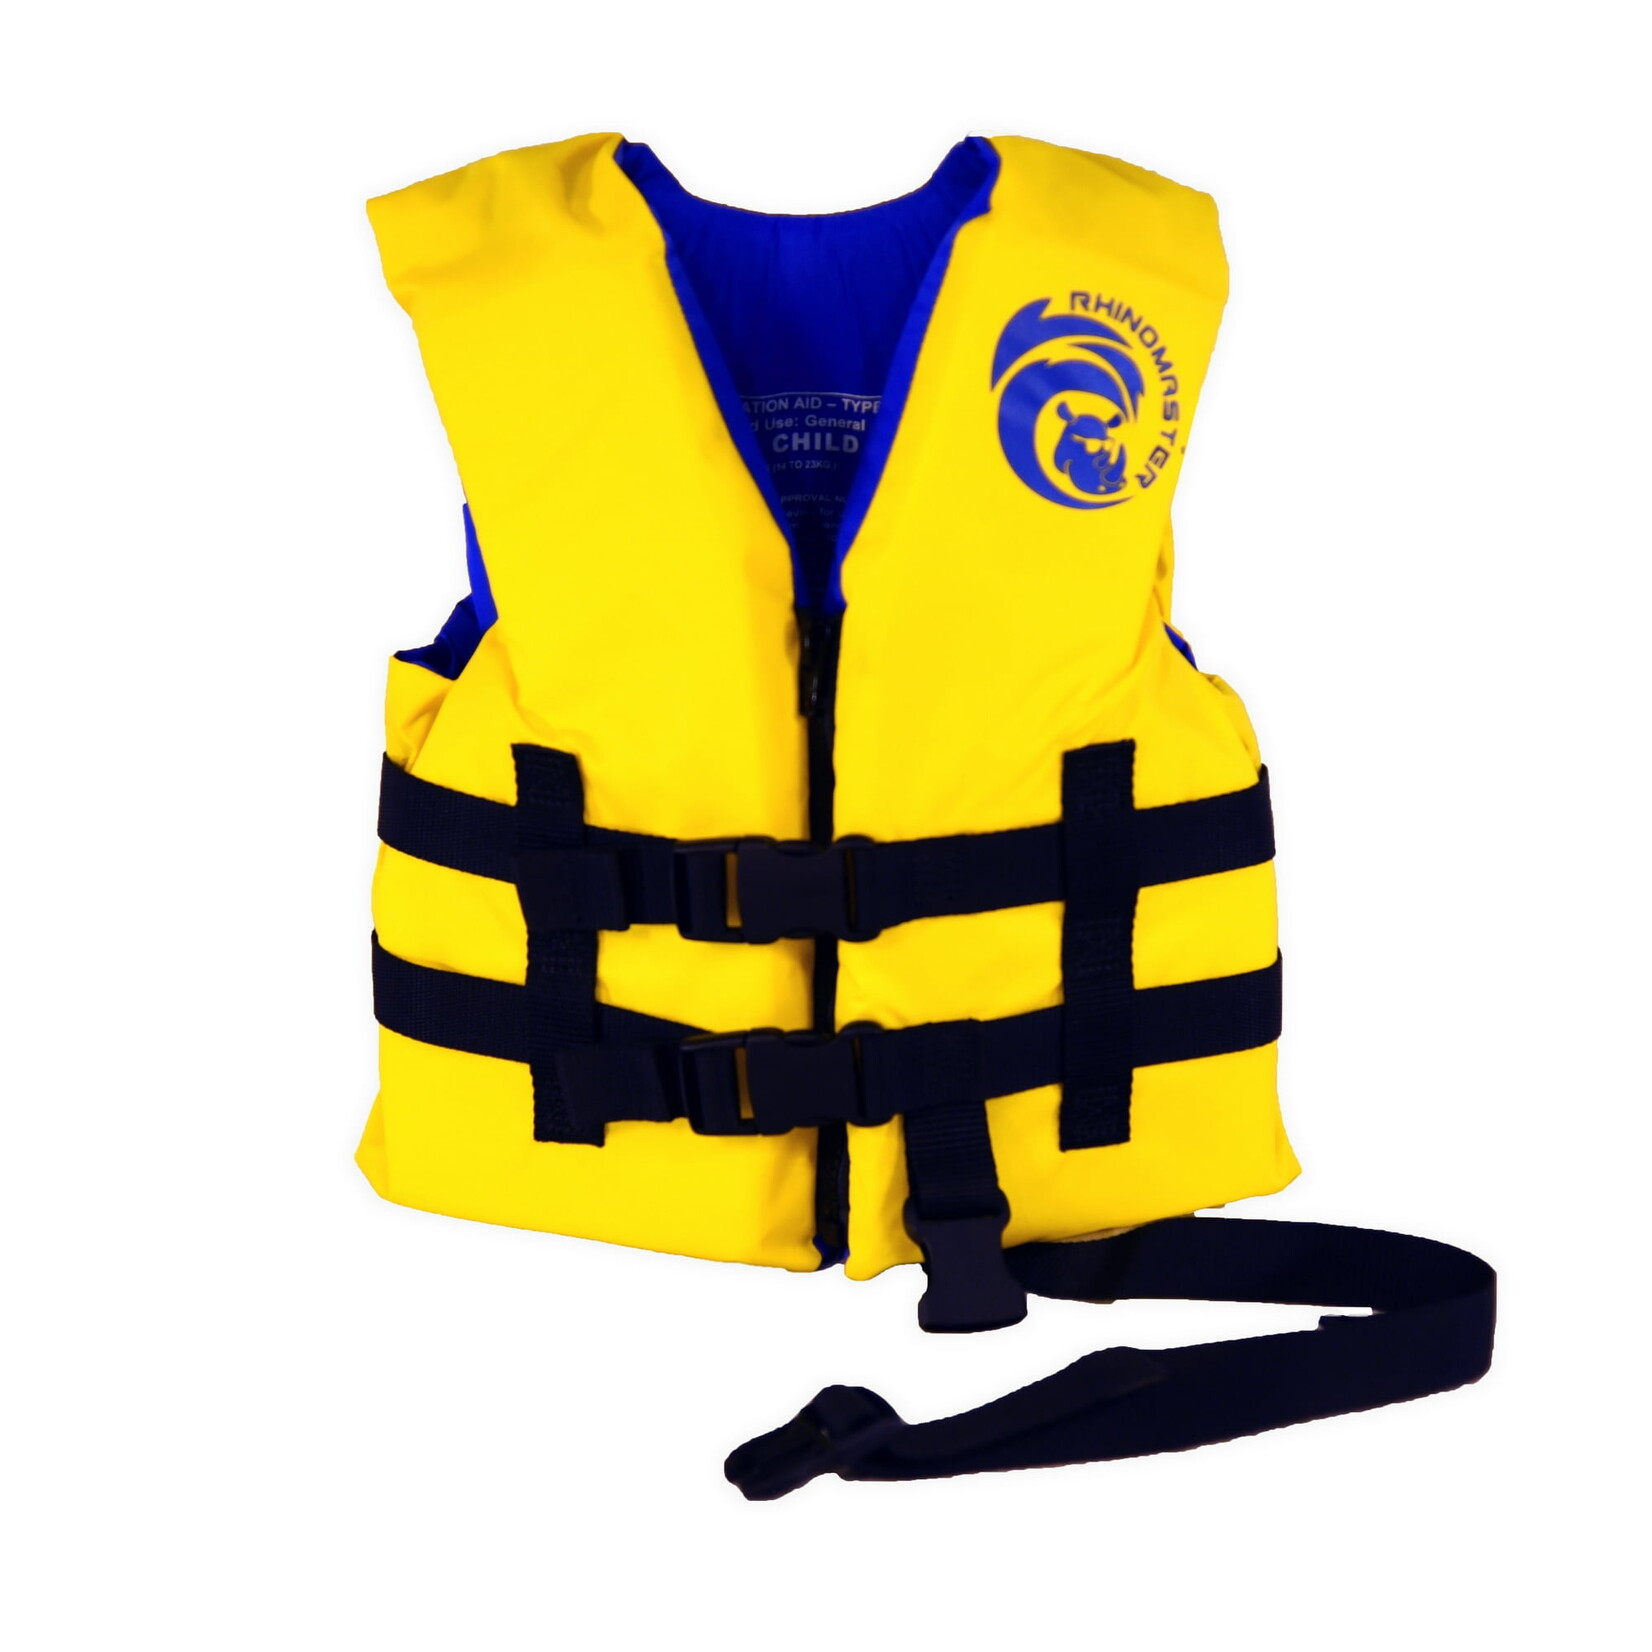 RhinoMaster Youth Life Vest for Watersports - Yellow